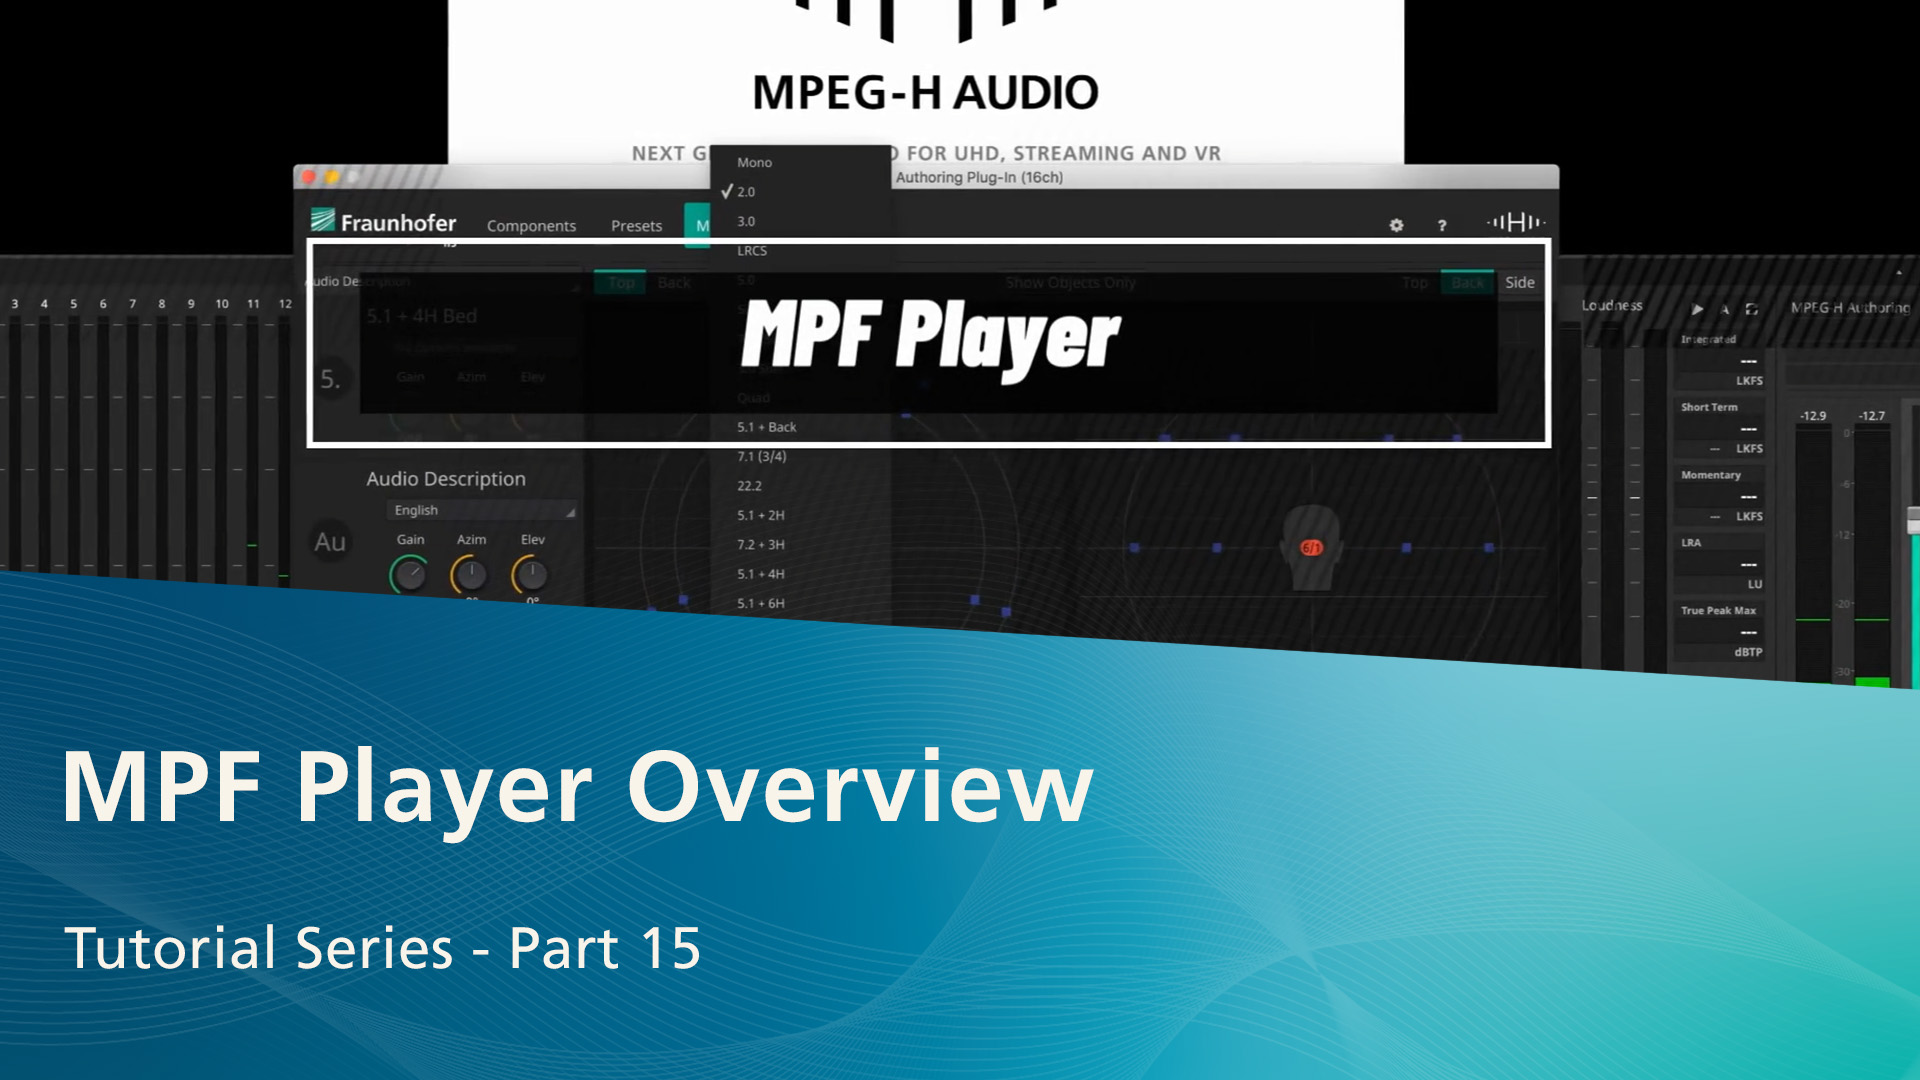 Video MPEG-H Audio Authoring Suite Tutorial Serie 15: MPF Player Overview